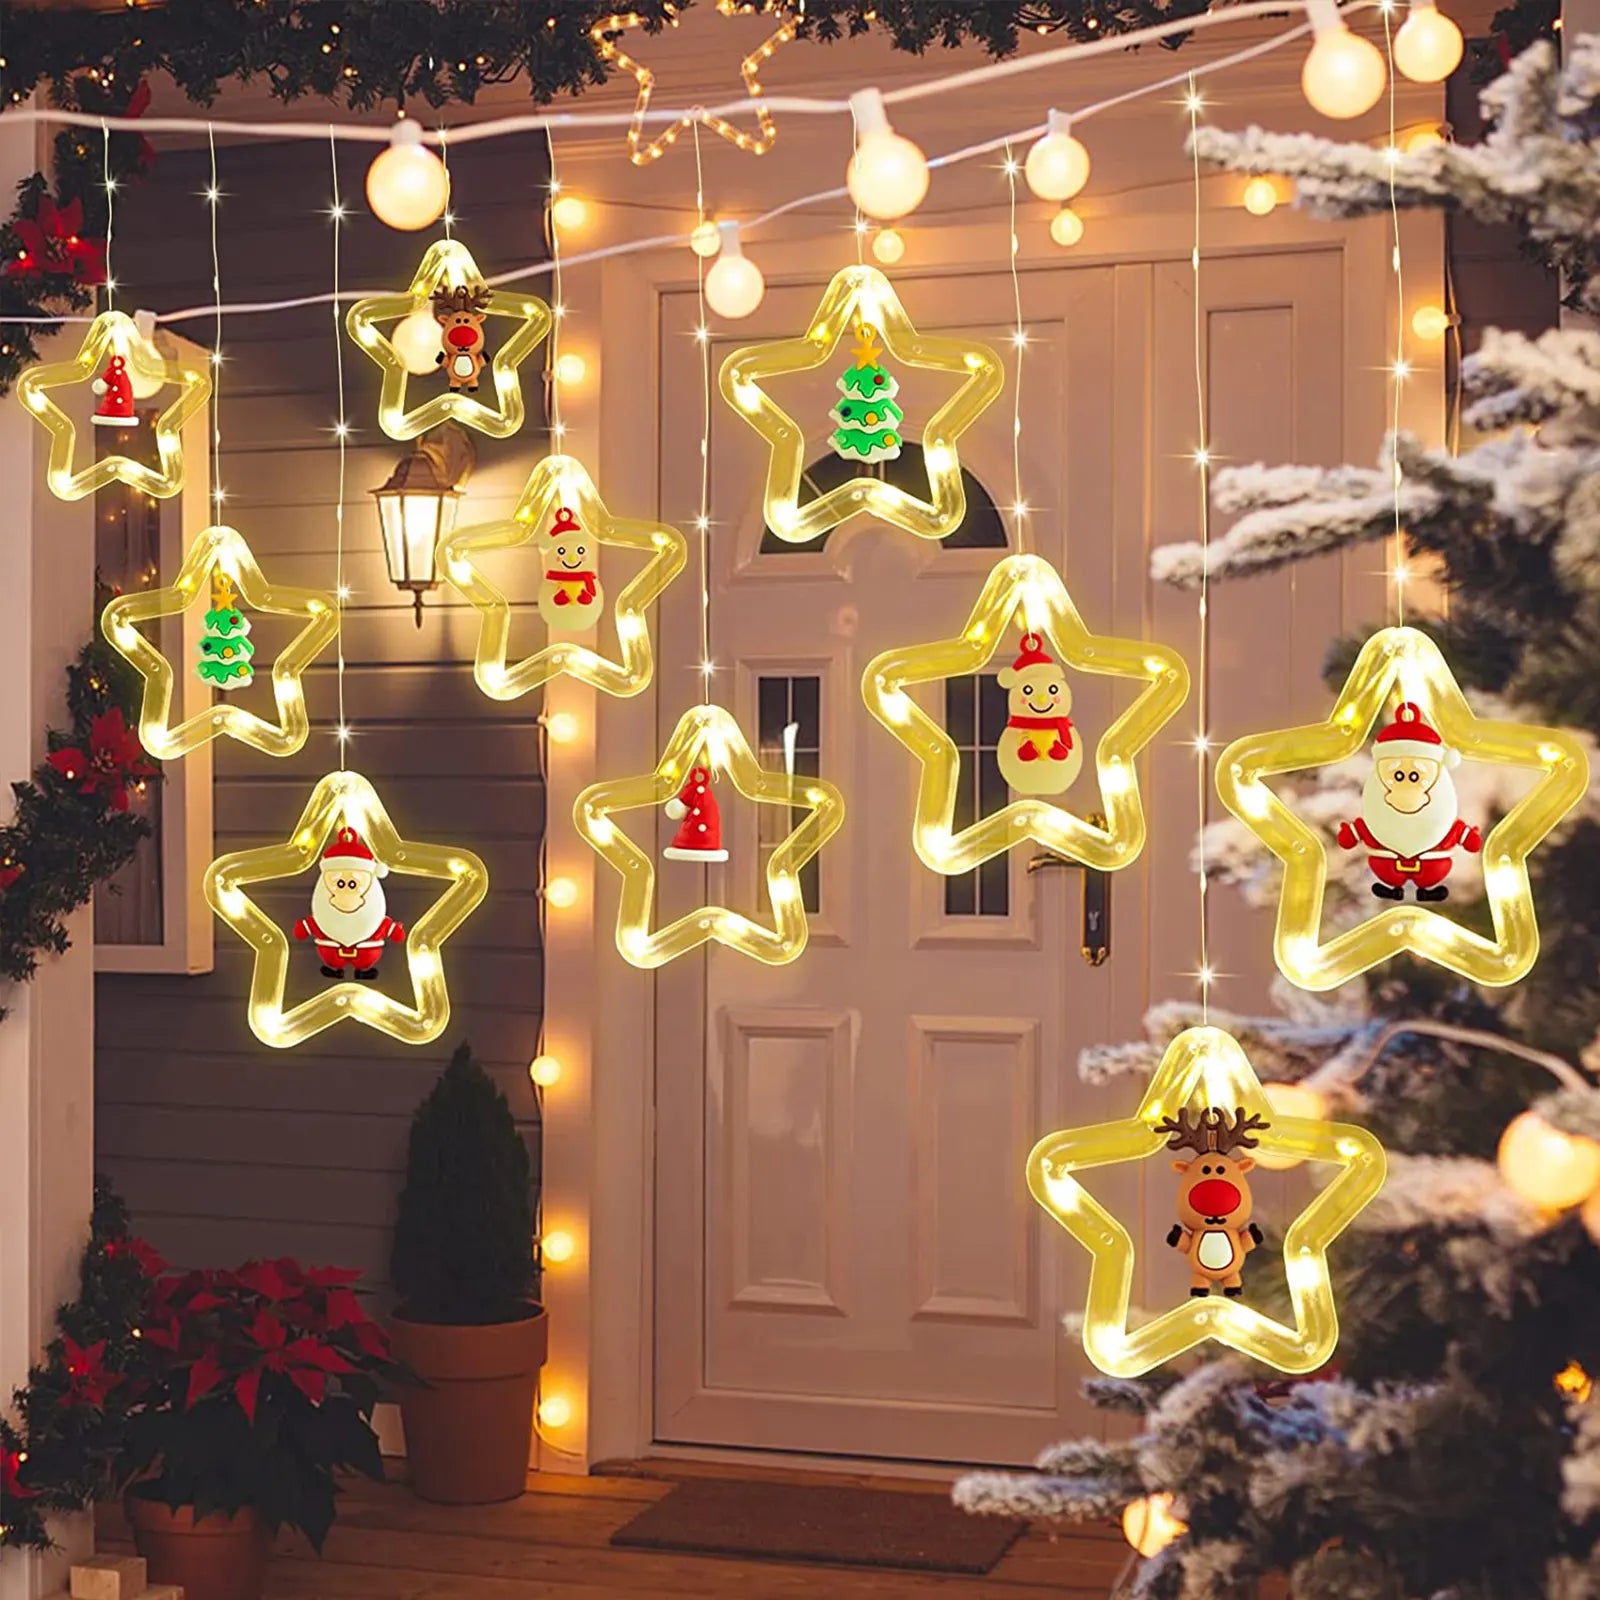 Christmas Lights, 9.84 Feet Long Decorations Fairy Light with 10 Star Shaped Lights